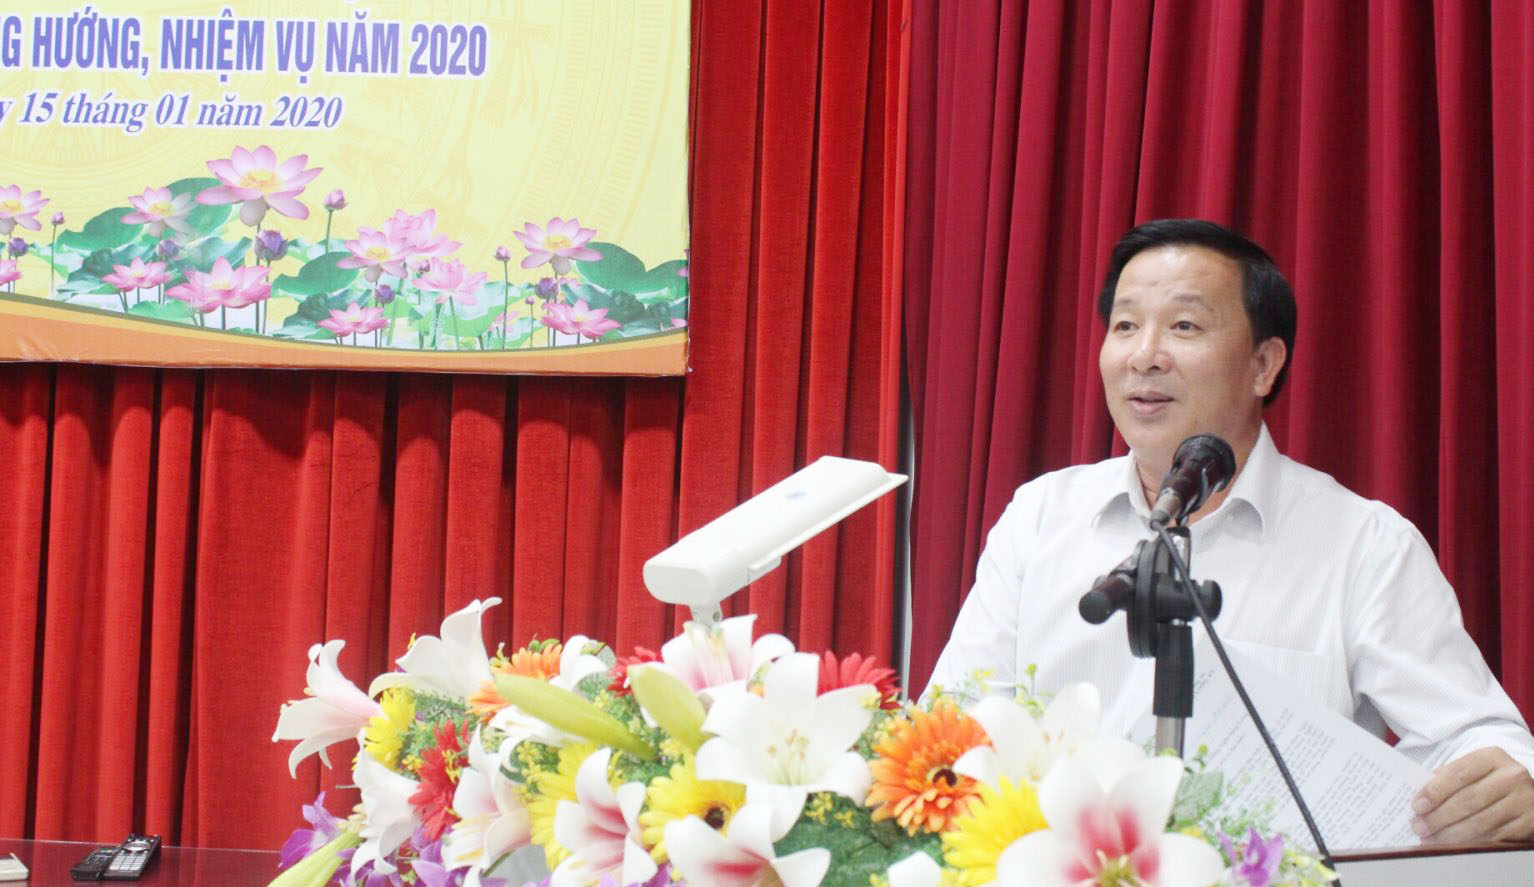 Deputy Chairman of Long An Provincial People's Committee - Nguyen Van Ut emphasizes the results of socio-economic development in 2019 and recognizes the contribution of Long An Banking sector.